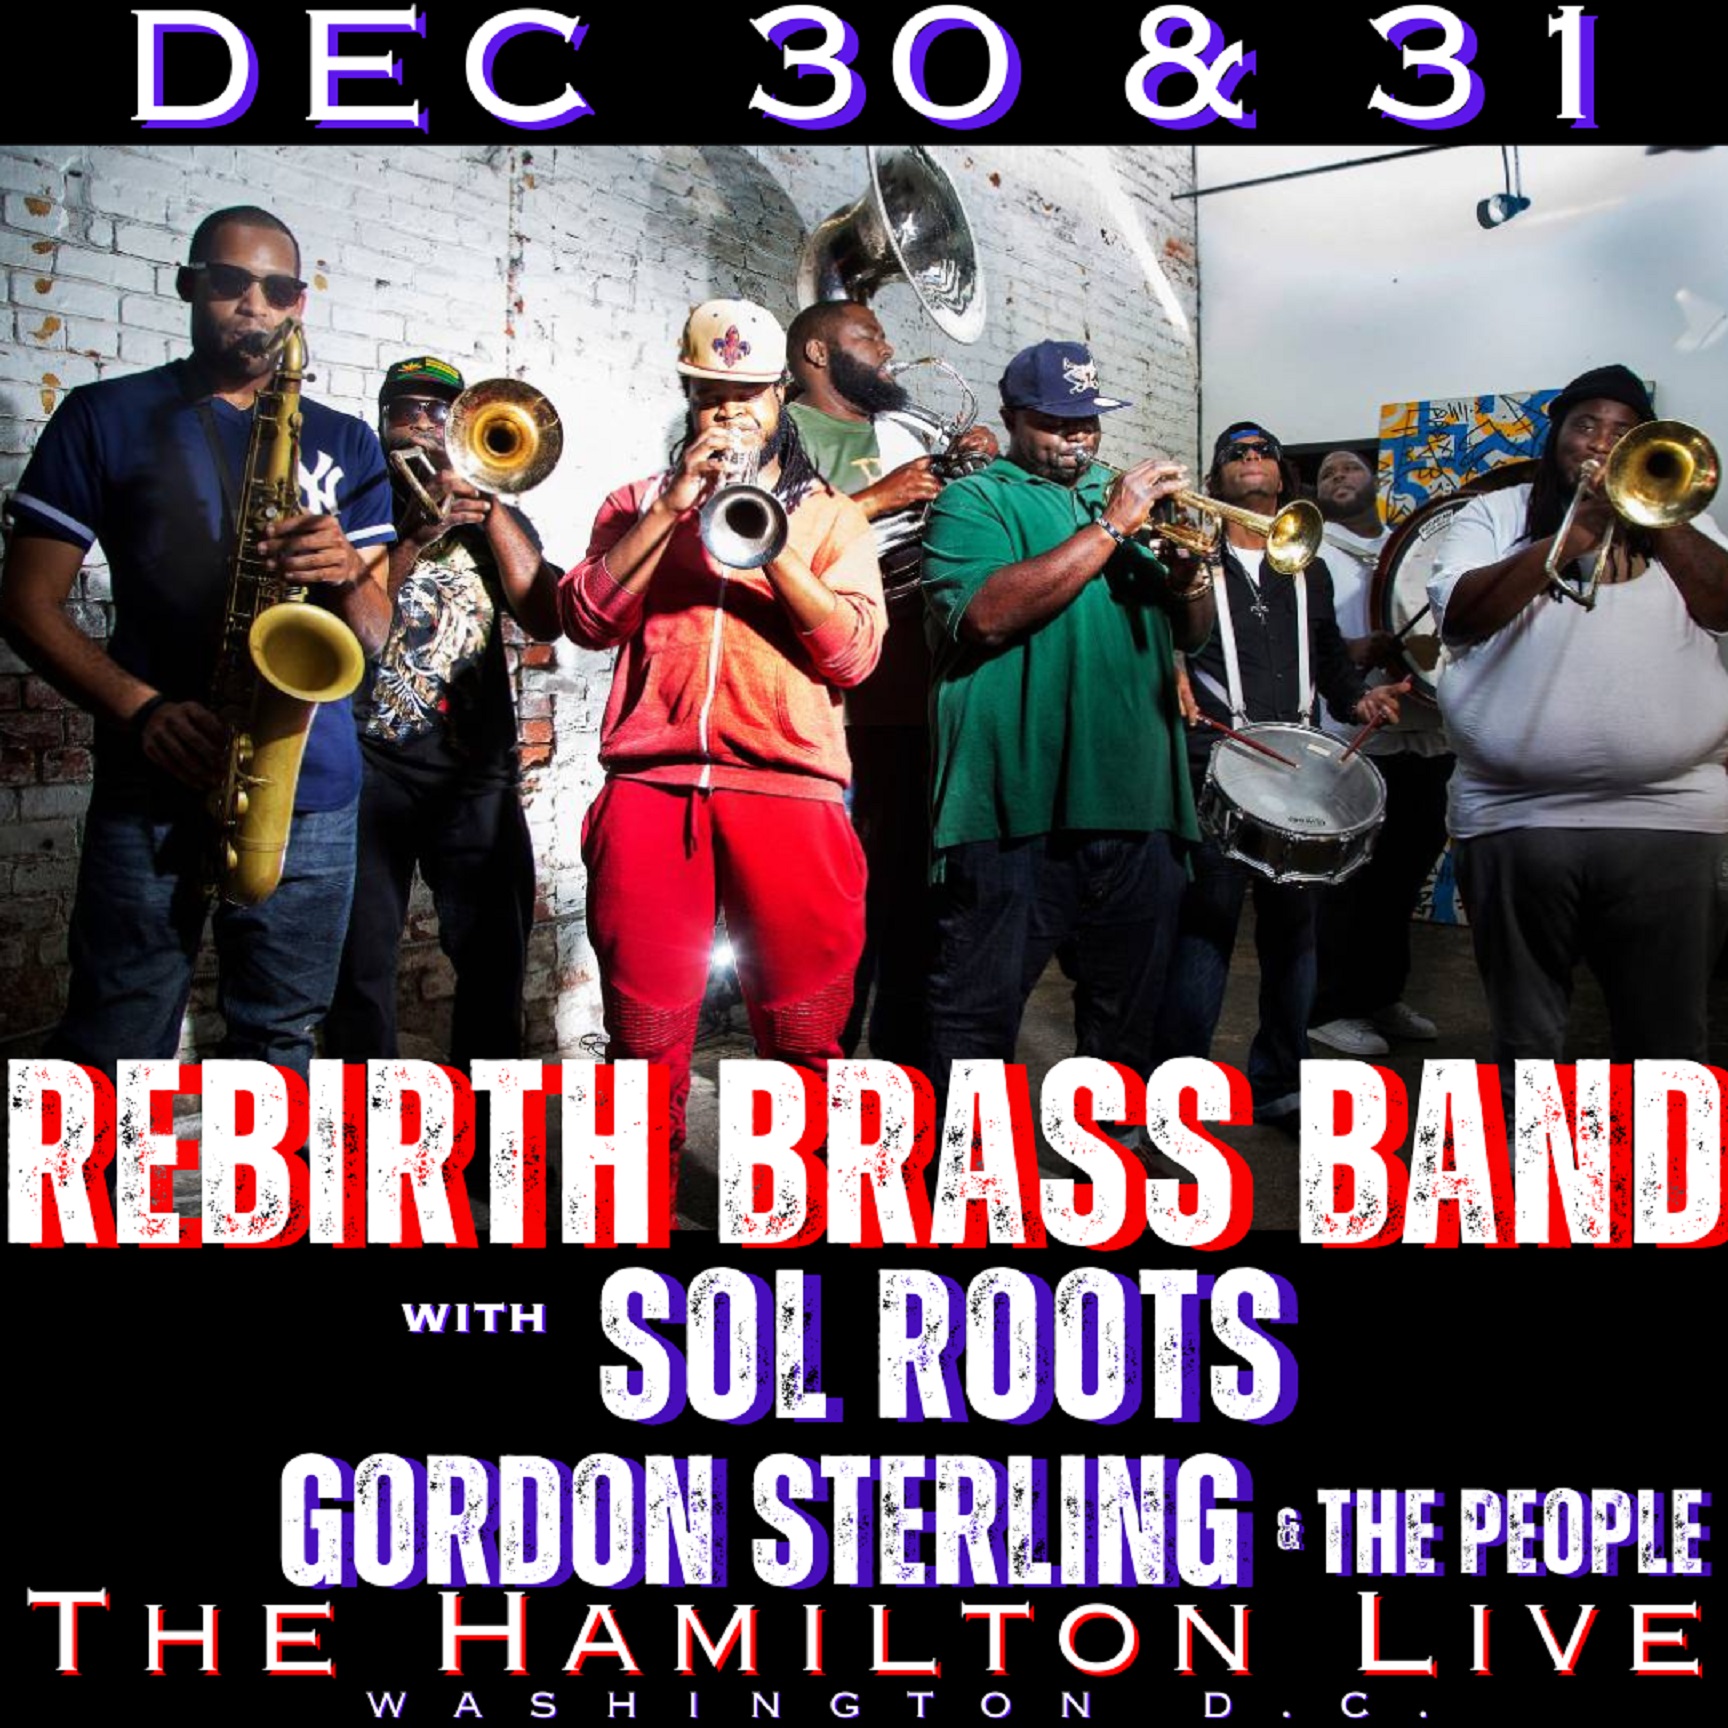 Rebirth Brass Band with Sol Roots and Gordon Sterling & the People perform at The Hamilton Live in Washington D.C.